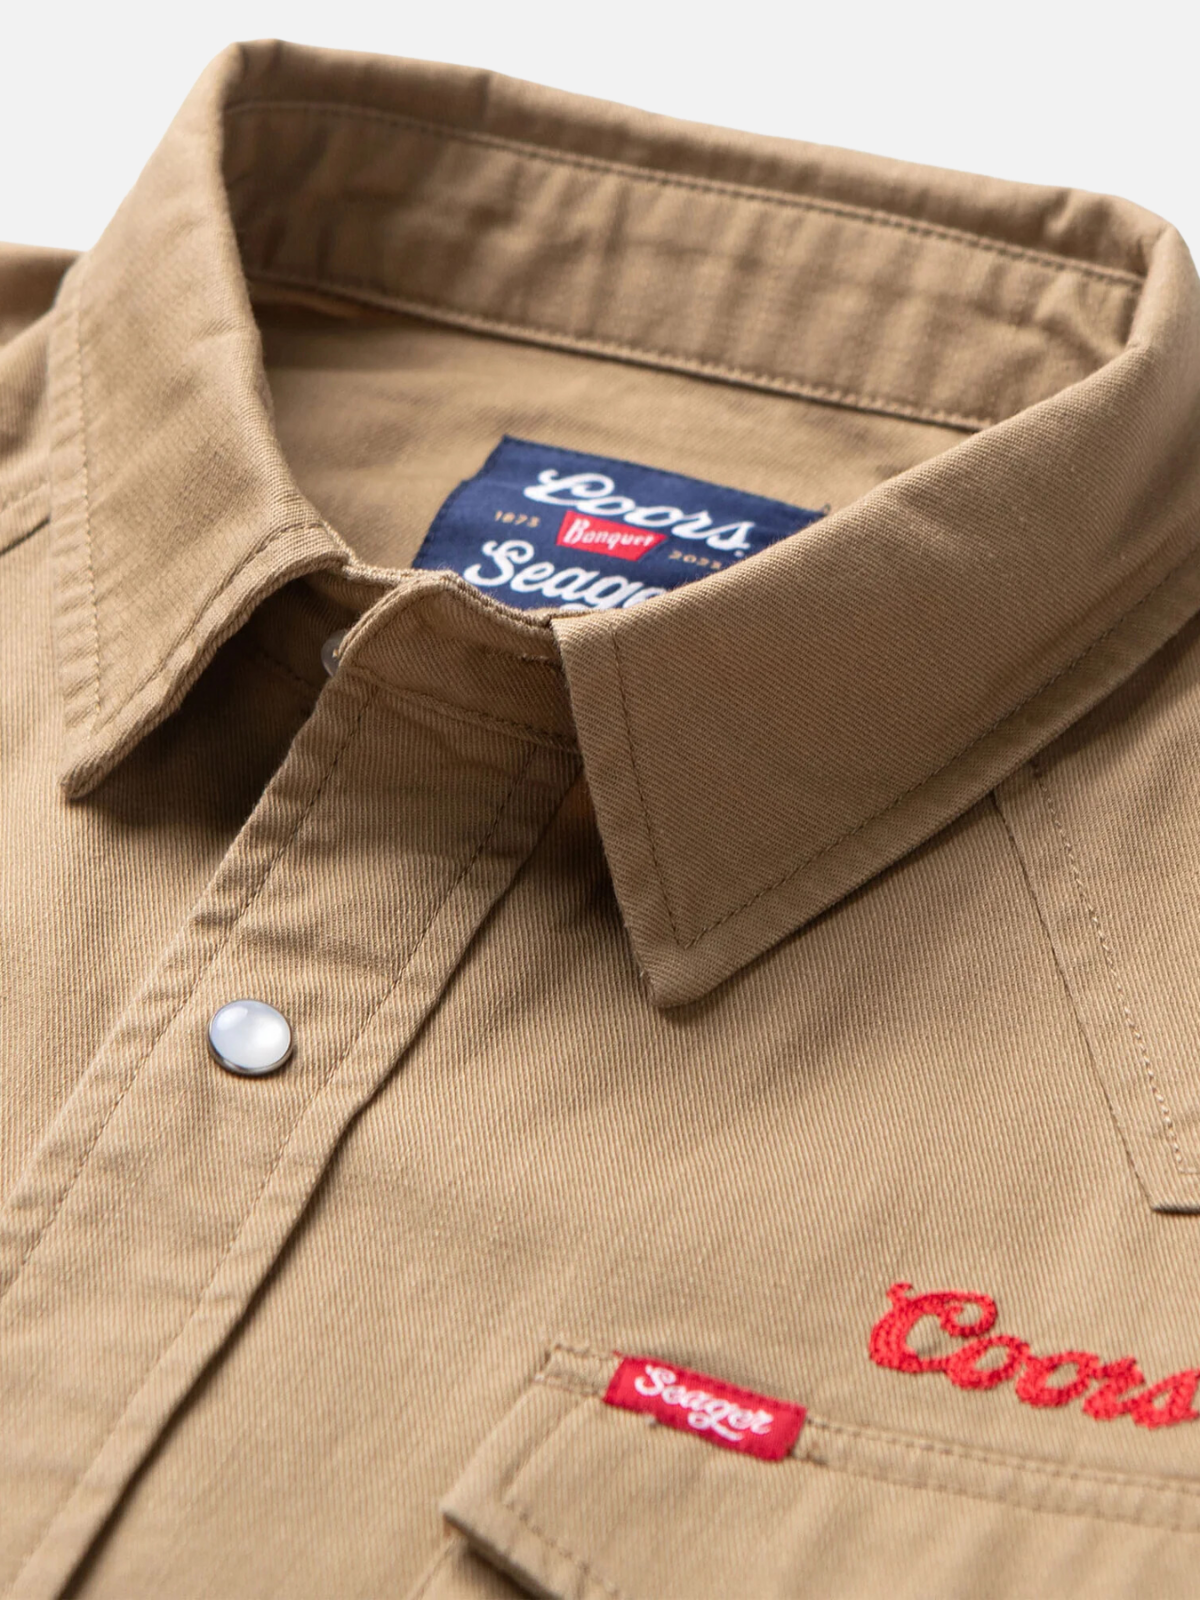 seager coors banquet beer collaboration celebrating 150 years of the brand reagan denim pearl snap khaki ls long sleeve button down kempt athens ga georgia men's clothing store western shirt